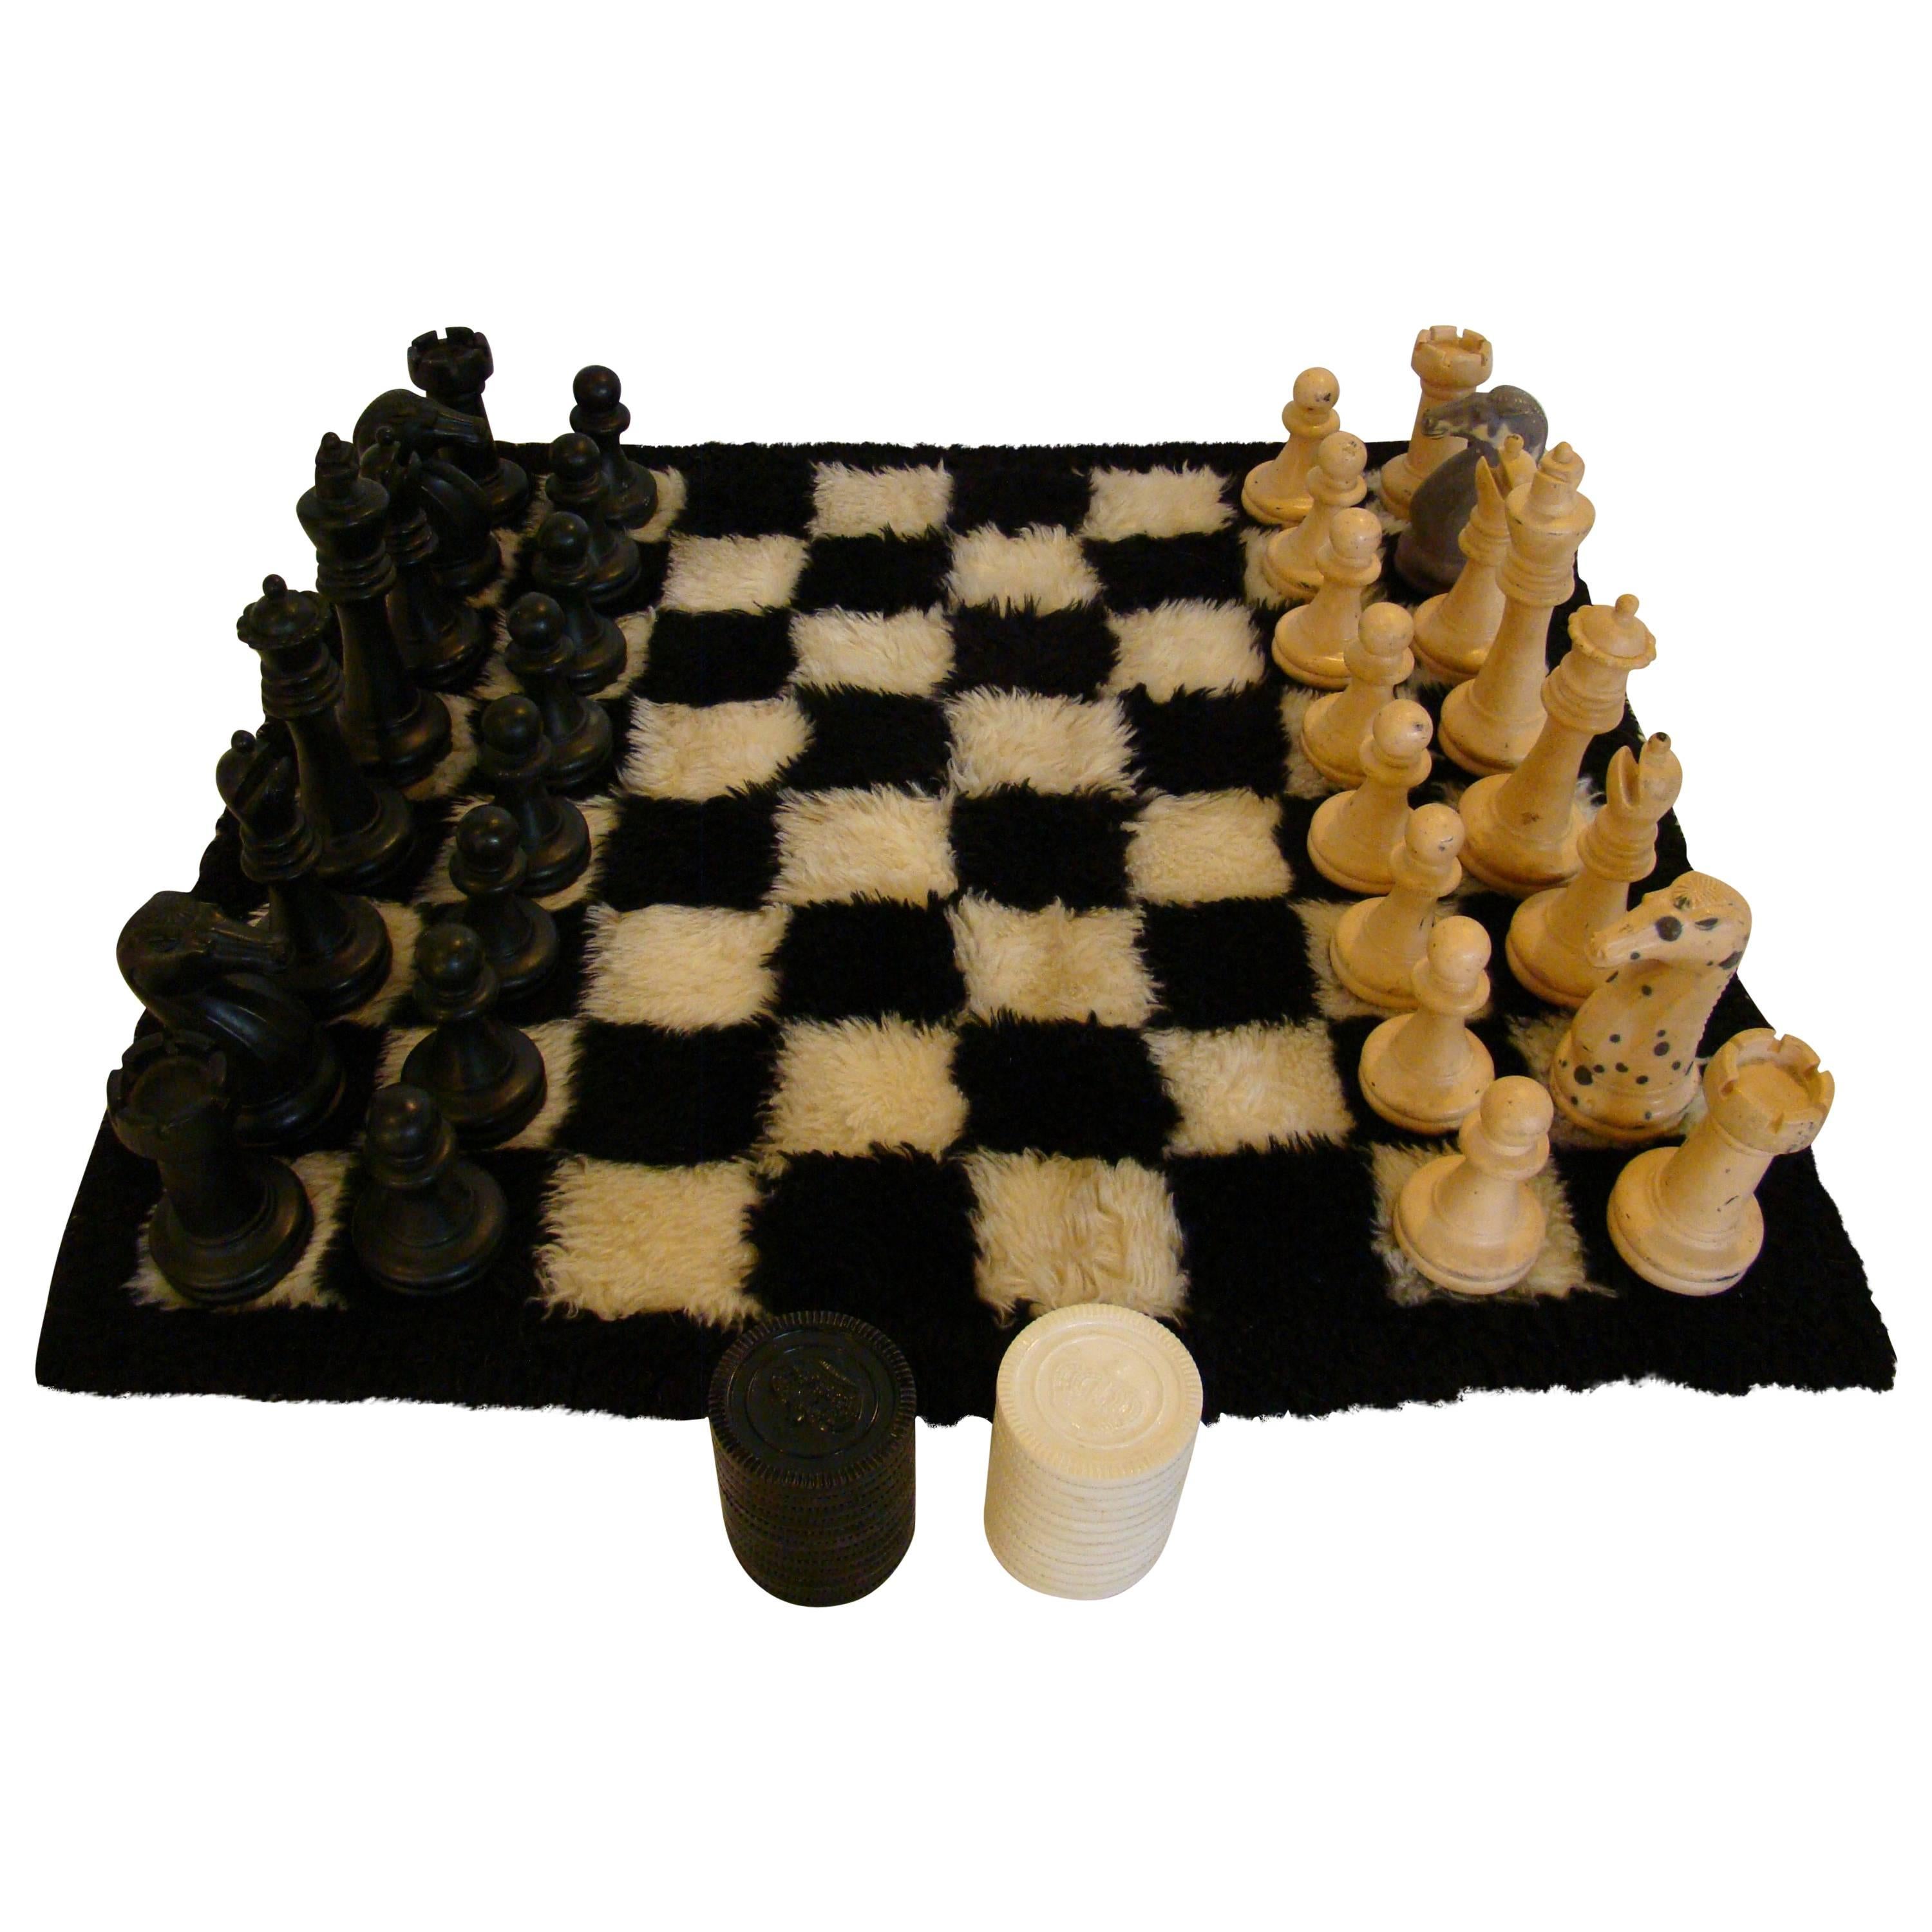 1970s, Executive Chess or Checker Set with Rug by Glenoit Chessmate Game For Sale